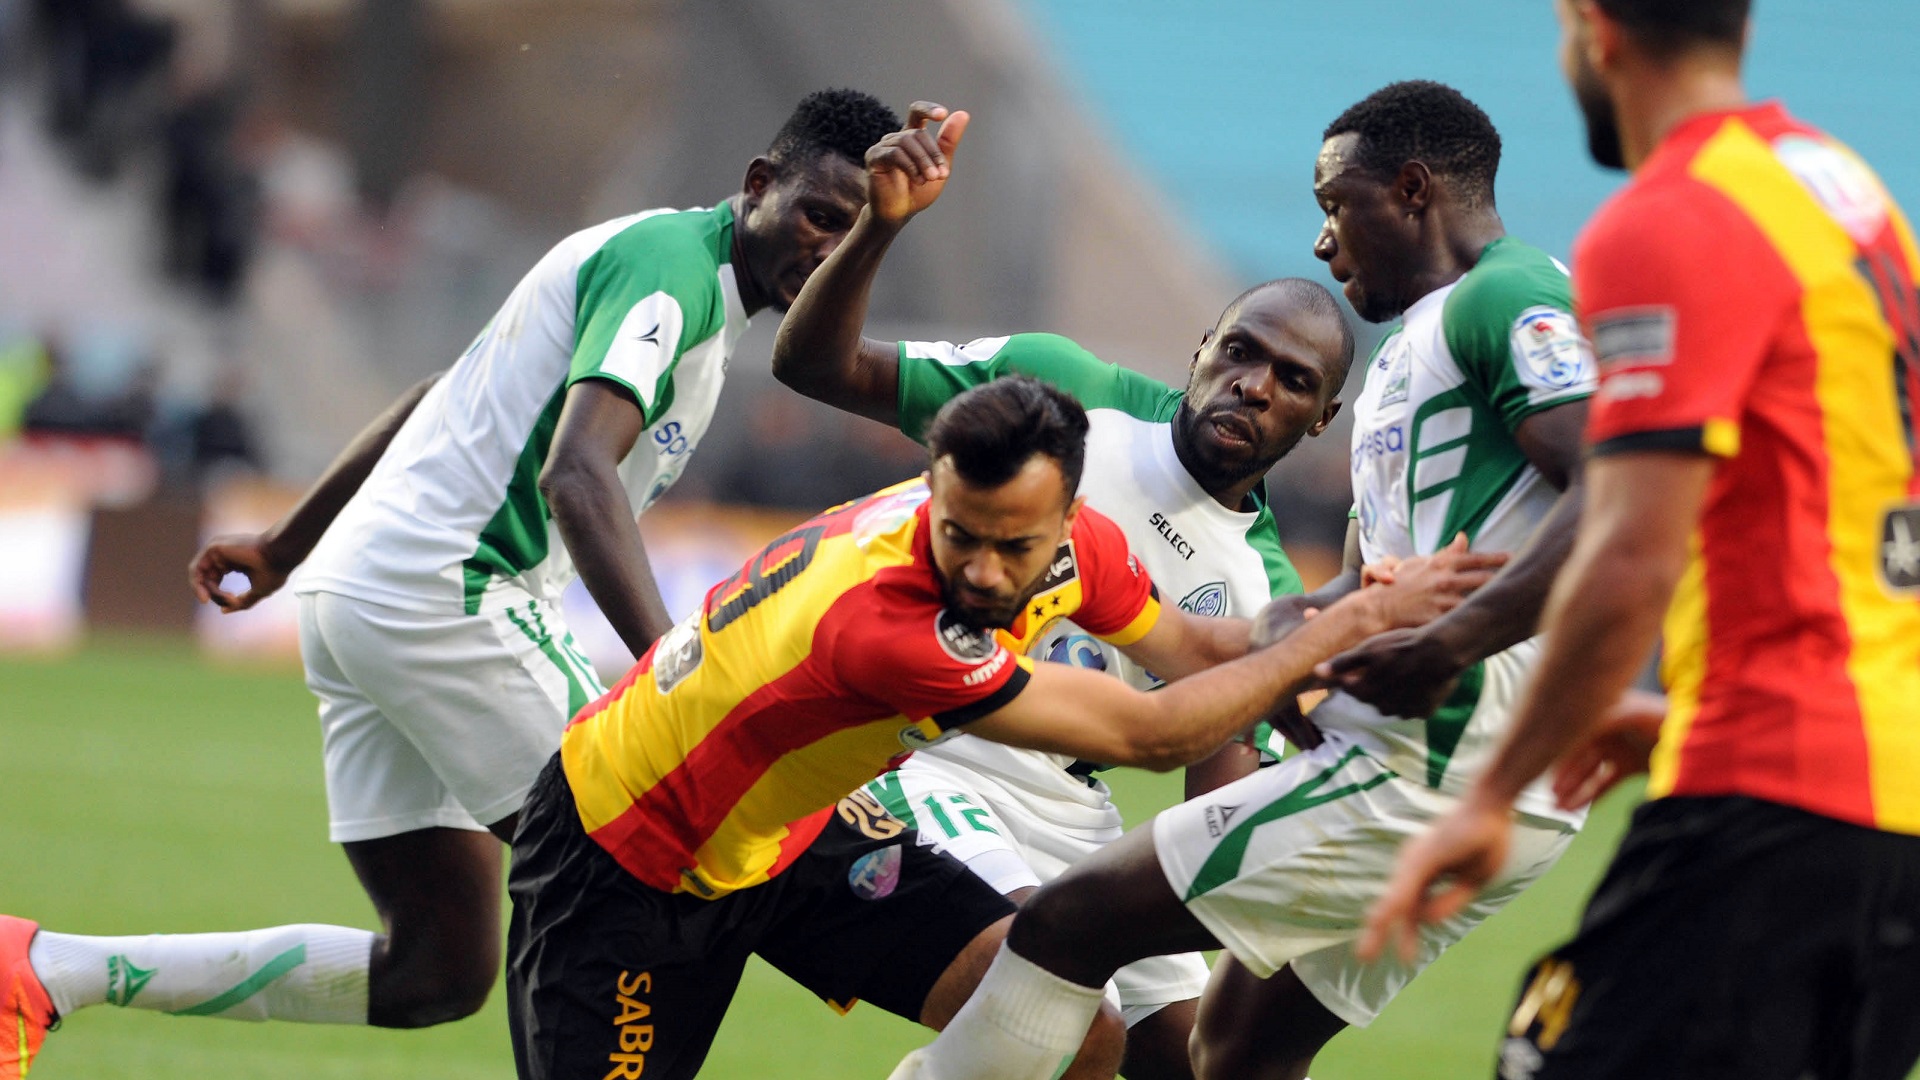 Esperance de Tunis player Khnissi Taha Yassine and Gor Mahia players fight for the ball during the 2018 CAF Champions League